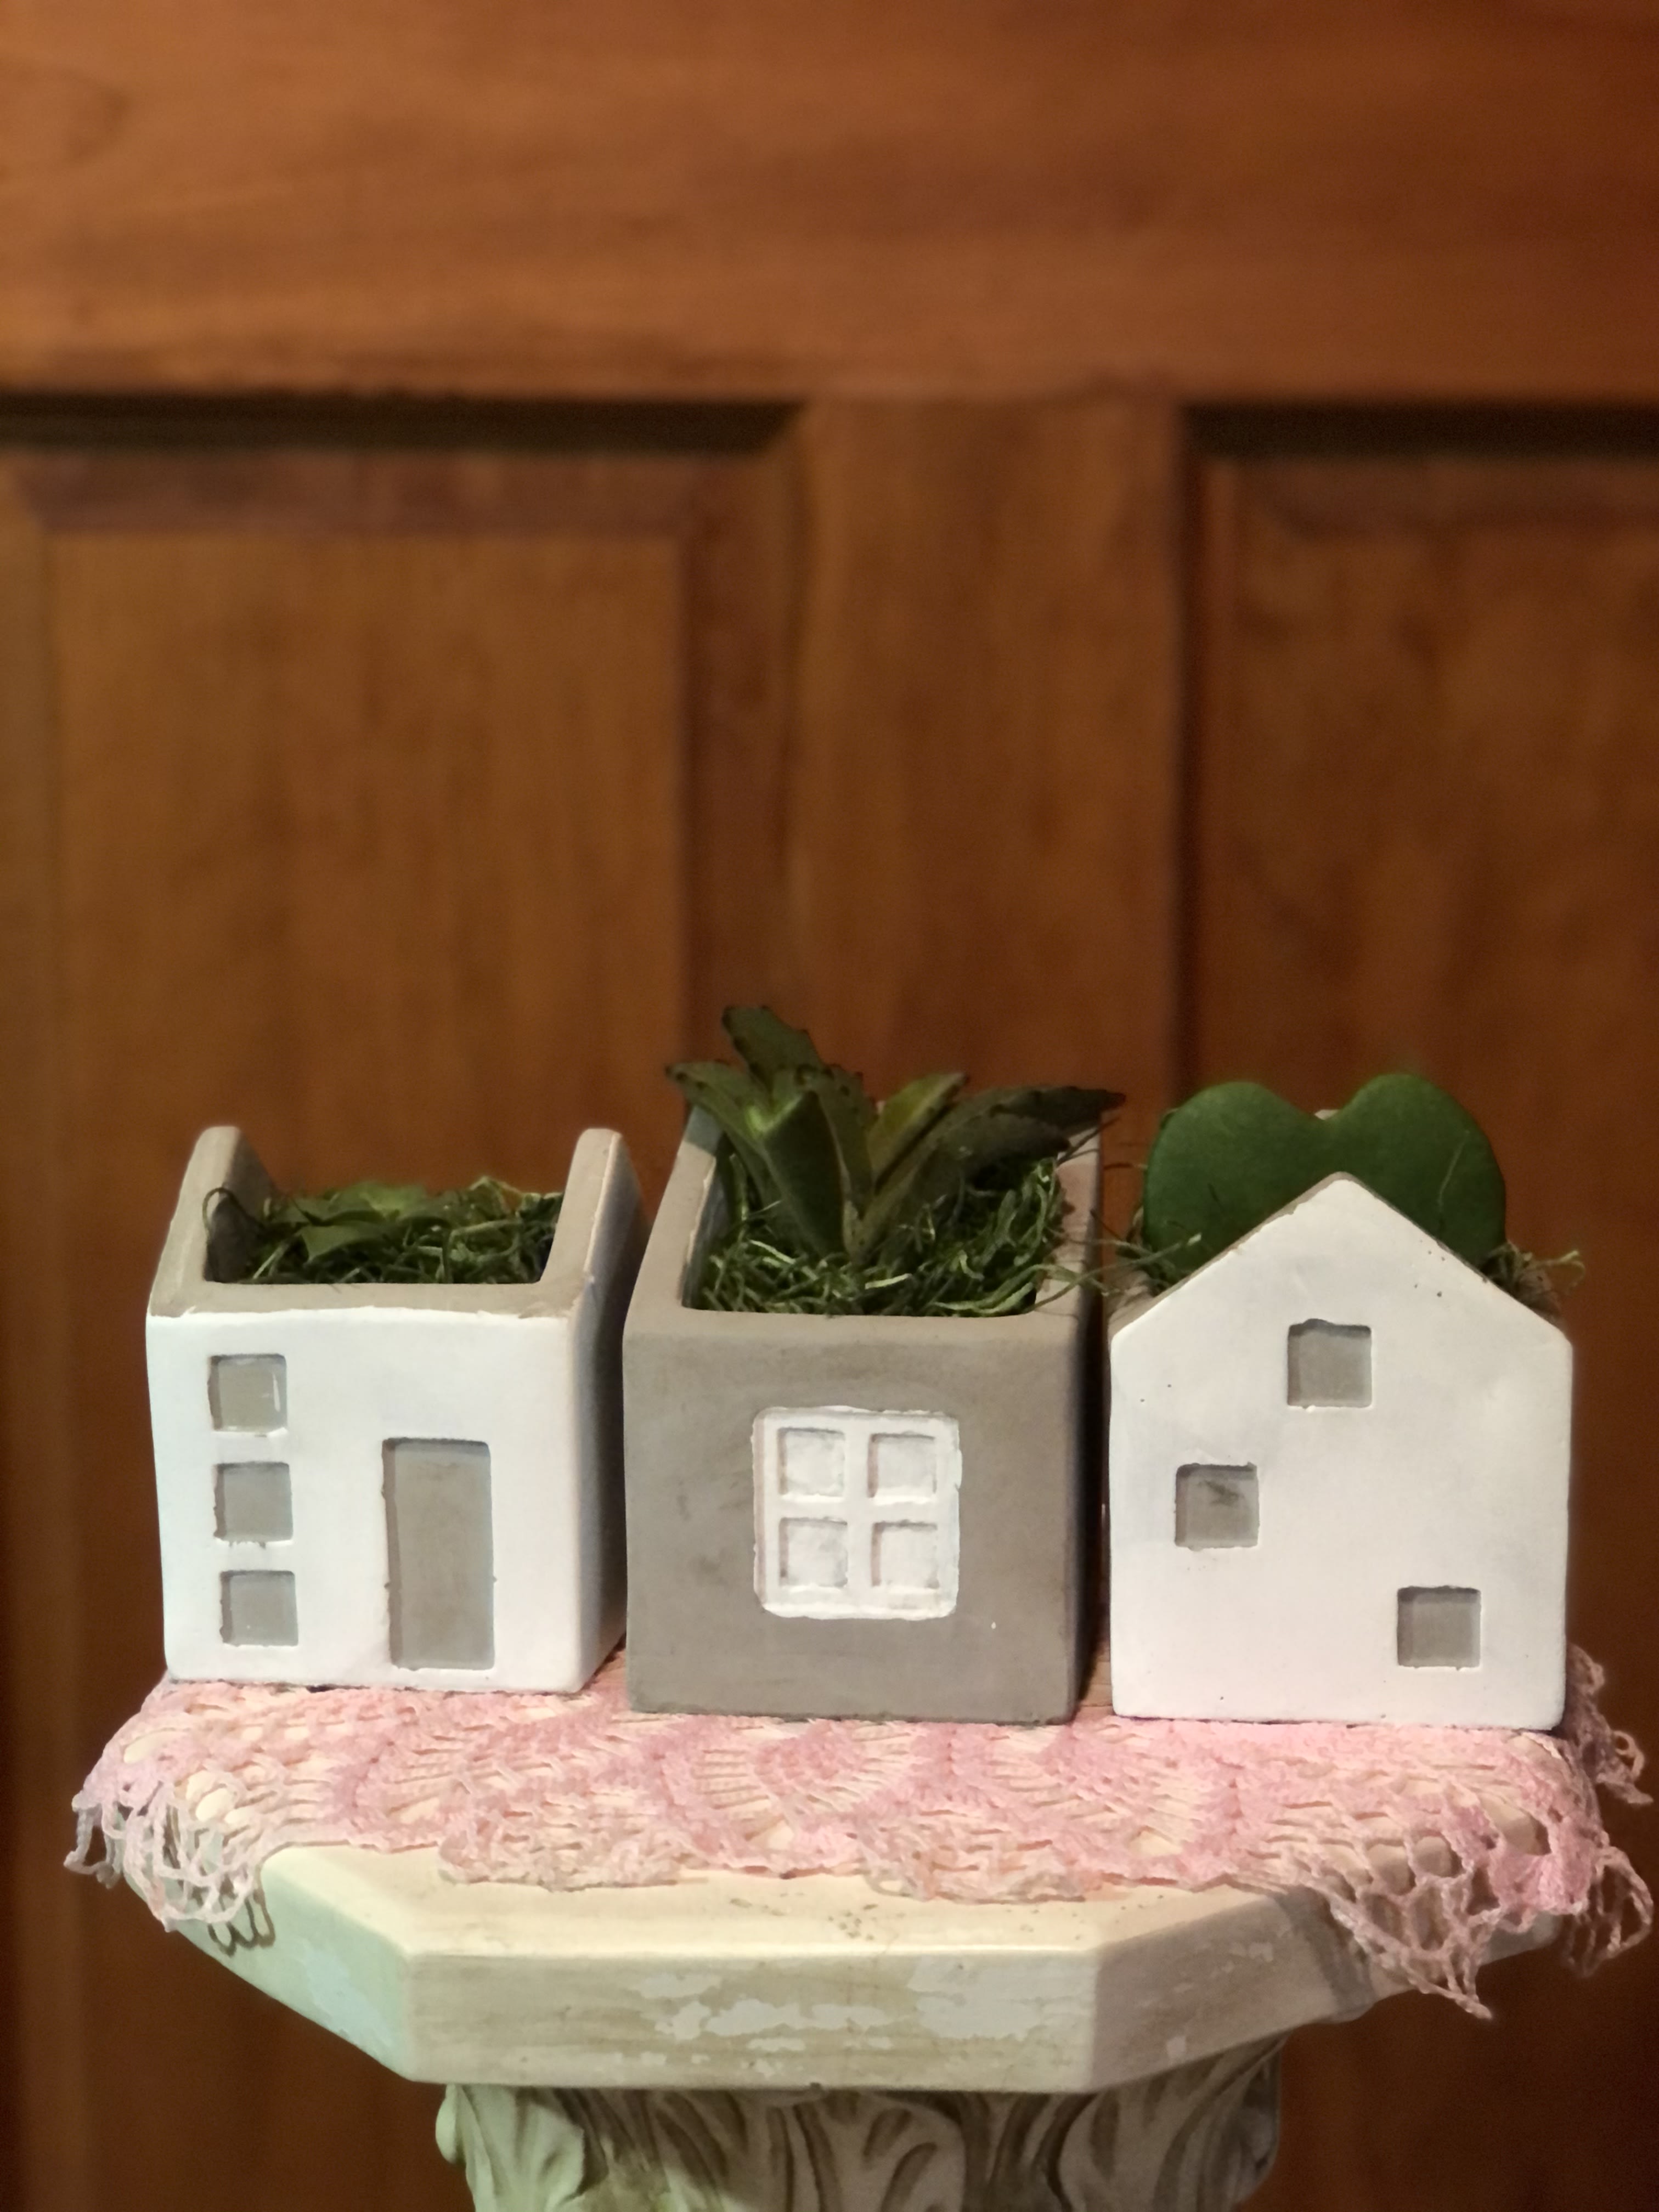 Stone Cottage Village - Natural hand-thrown earthenware clay for a durable and substantial container.  3 containers, separately placed together to form a little village. Can be placed together or apart. Glazed with 3 different patterns of cottage door &amp; windows on one side. The cottage provide the perfect container for our mini succulents. ( each container has 1 succulent.) Container is filled with succulent potting soil and sand. Fertilizer is also layered with the soil mix to provide a year or more of plant growth until you may need to re-pot your plants. Inventory count: 2 remaining. (succulents may vary by season.)